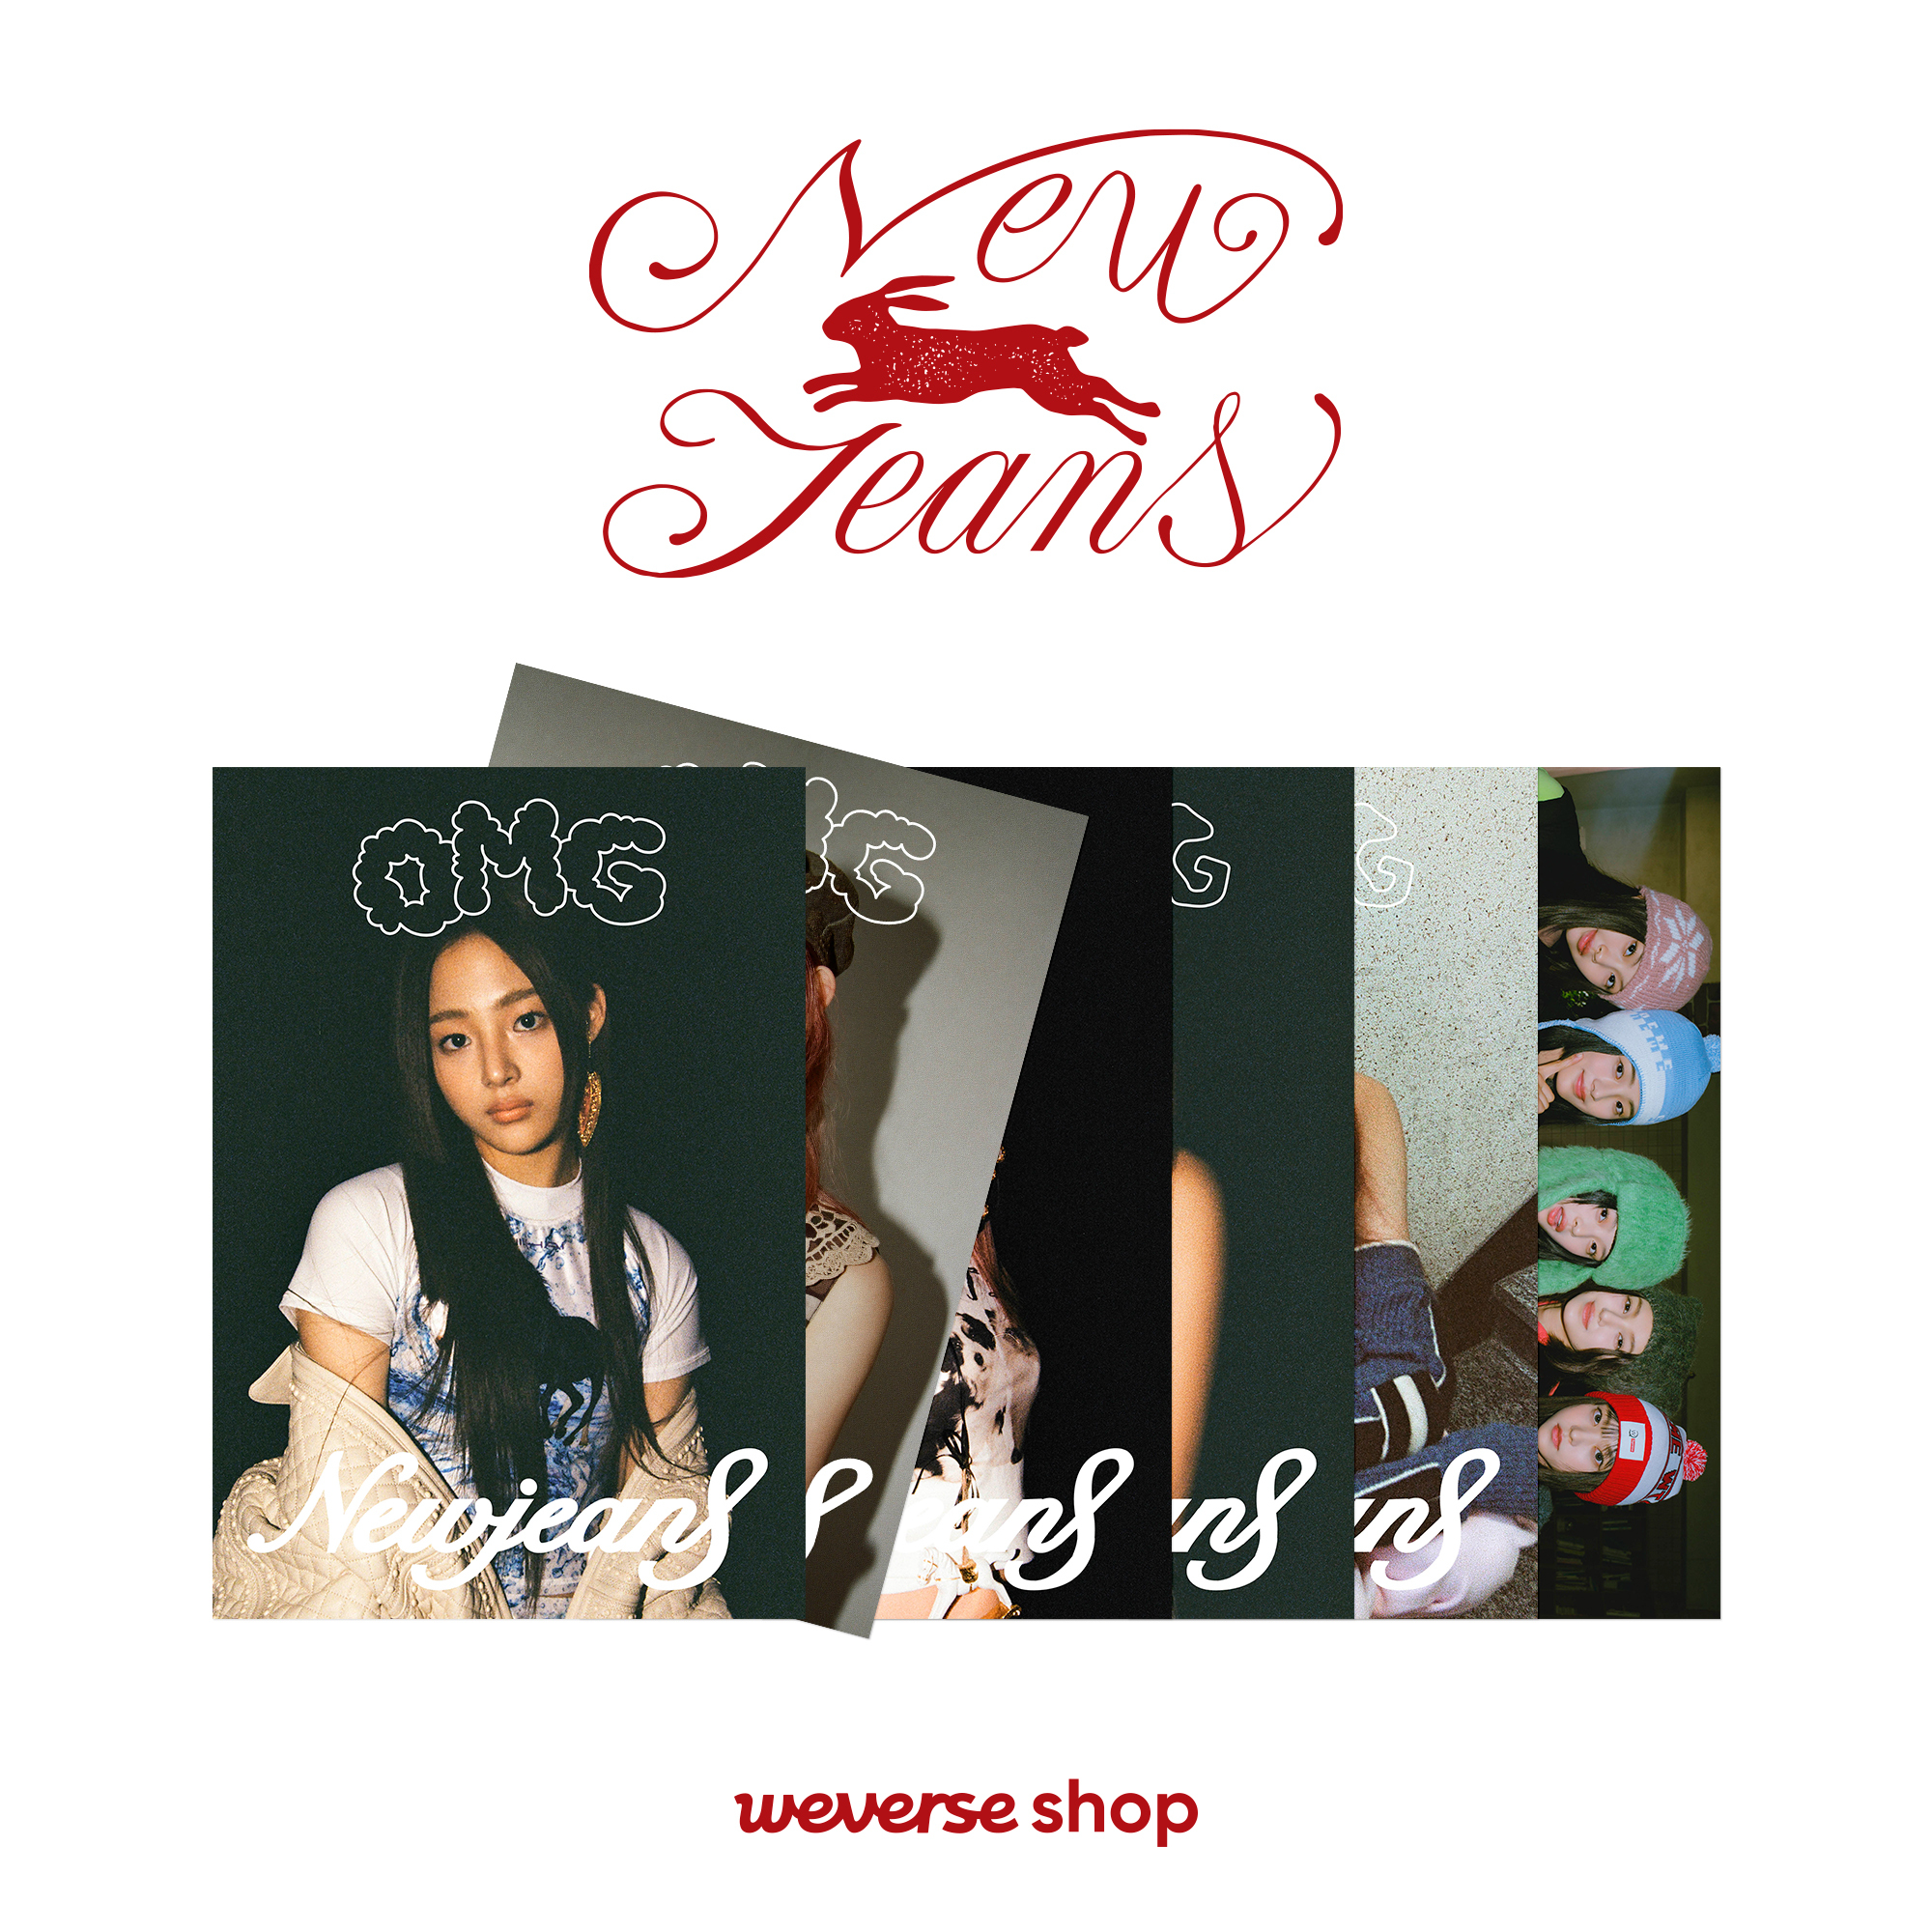 NewJeans OMG weverse shop ダニエル ラキドロ www